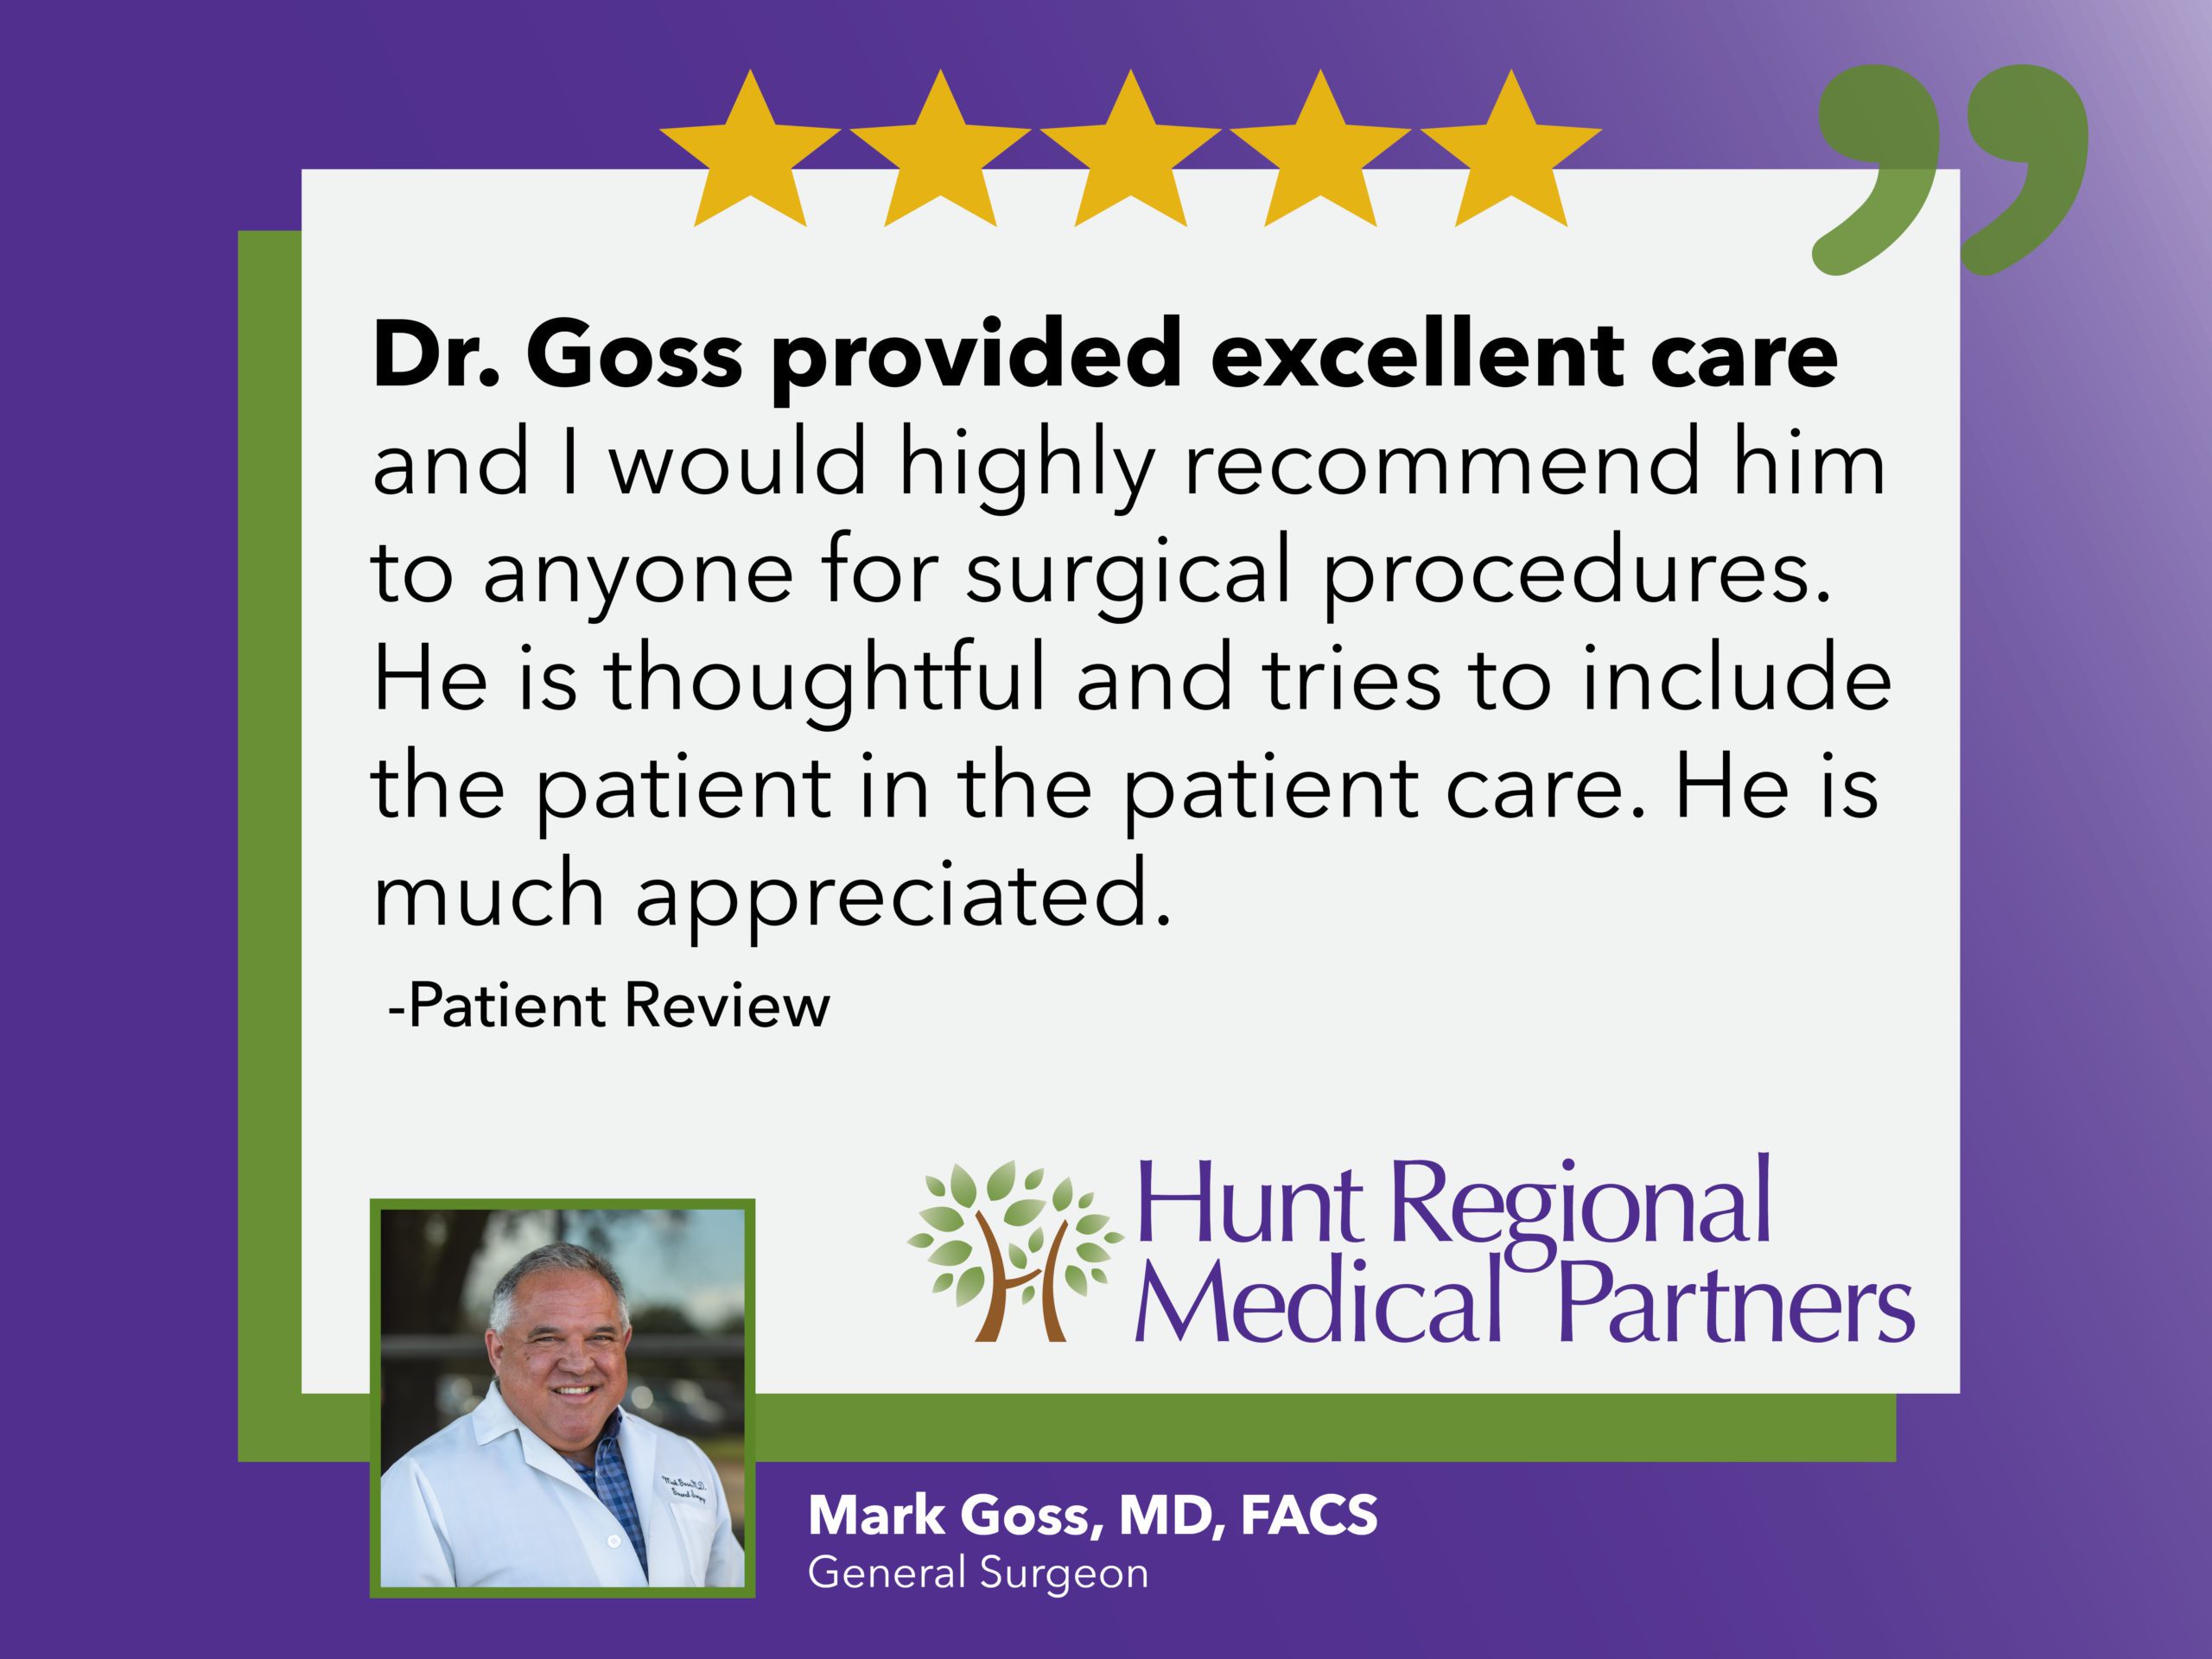 Dr. Goss provided excellent care and I would highly recommend him to anyone for surgical procedures. He is thoughtful and tries to include the patient in the patient care. He is much appreciated. | Patient Review | Hunt Regional Medical Partners | Mark Goss, MD, FACS | General Surgeon